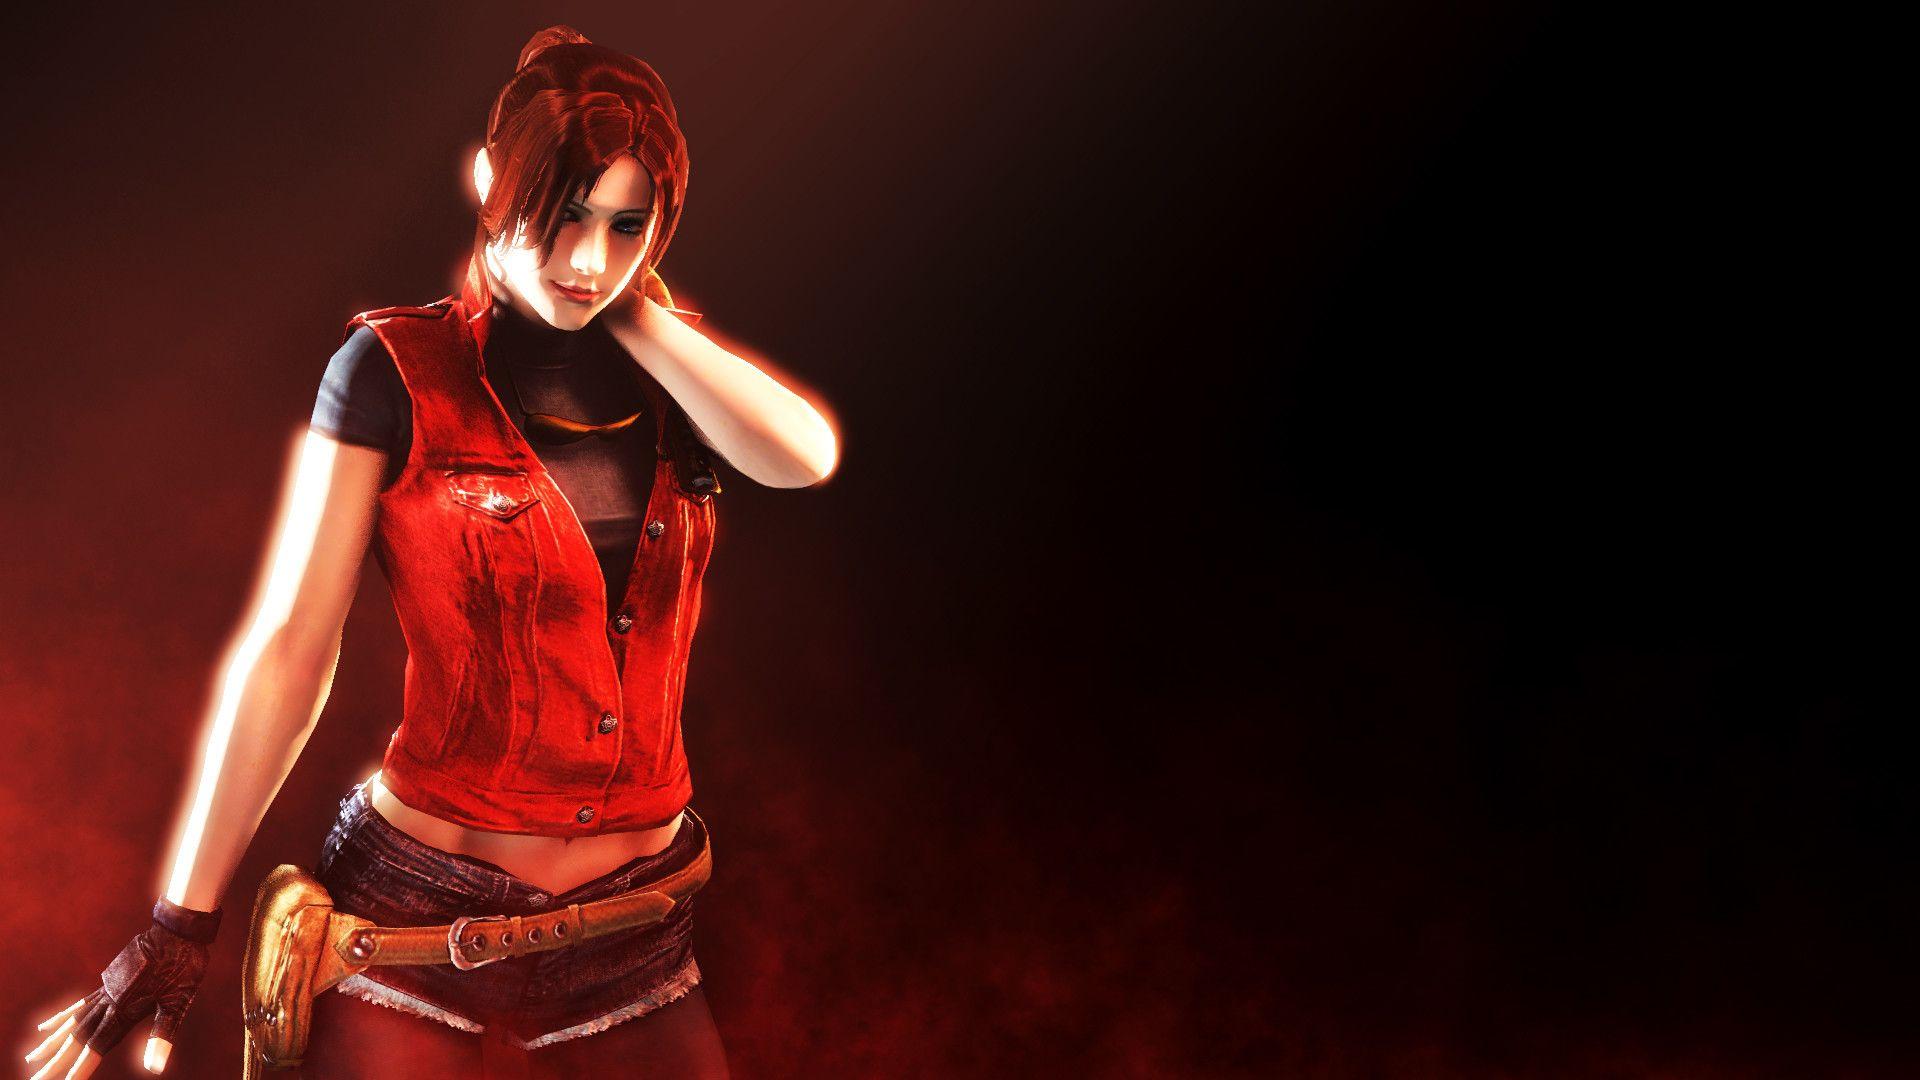 Resident Evil 2 Wallpapers Remake ✓ Labzada Wallpapers